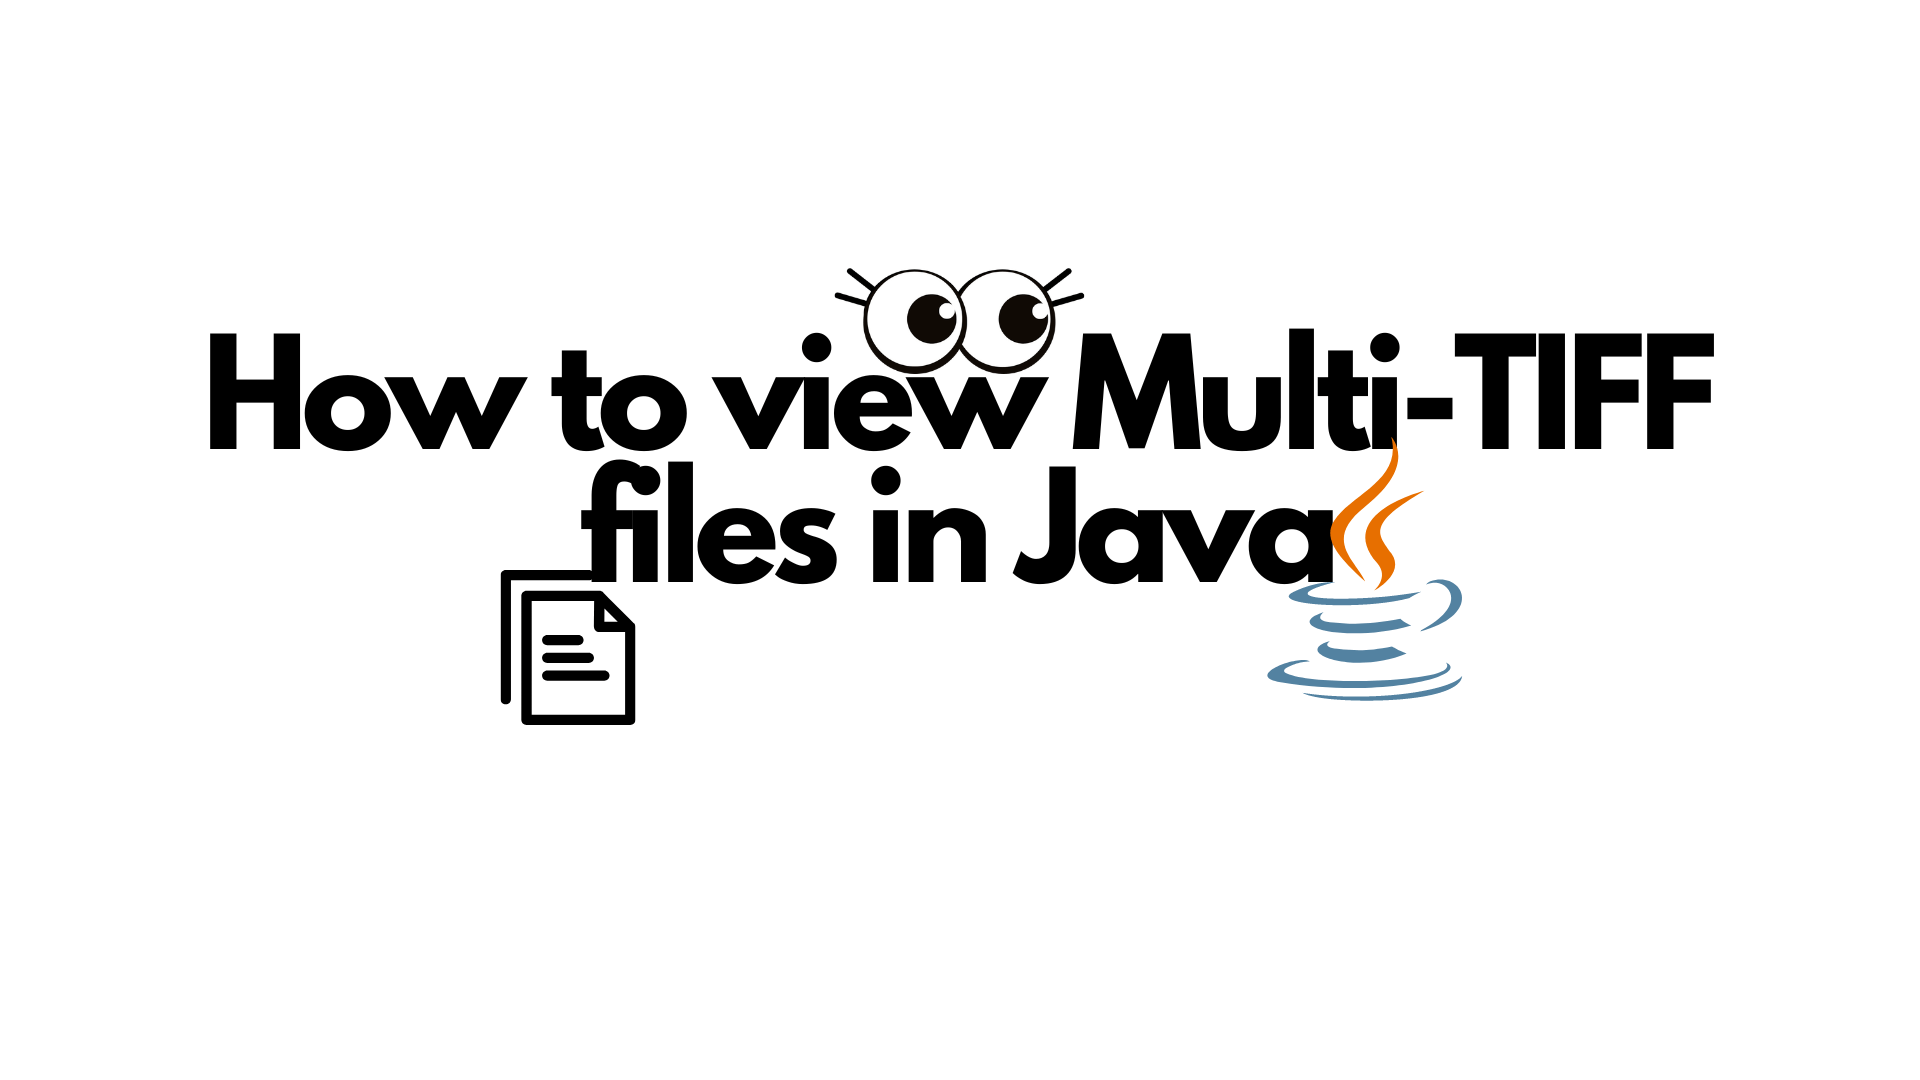 How to view Multi-TIFF files in Java